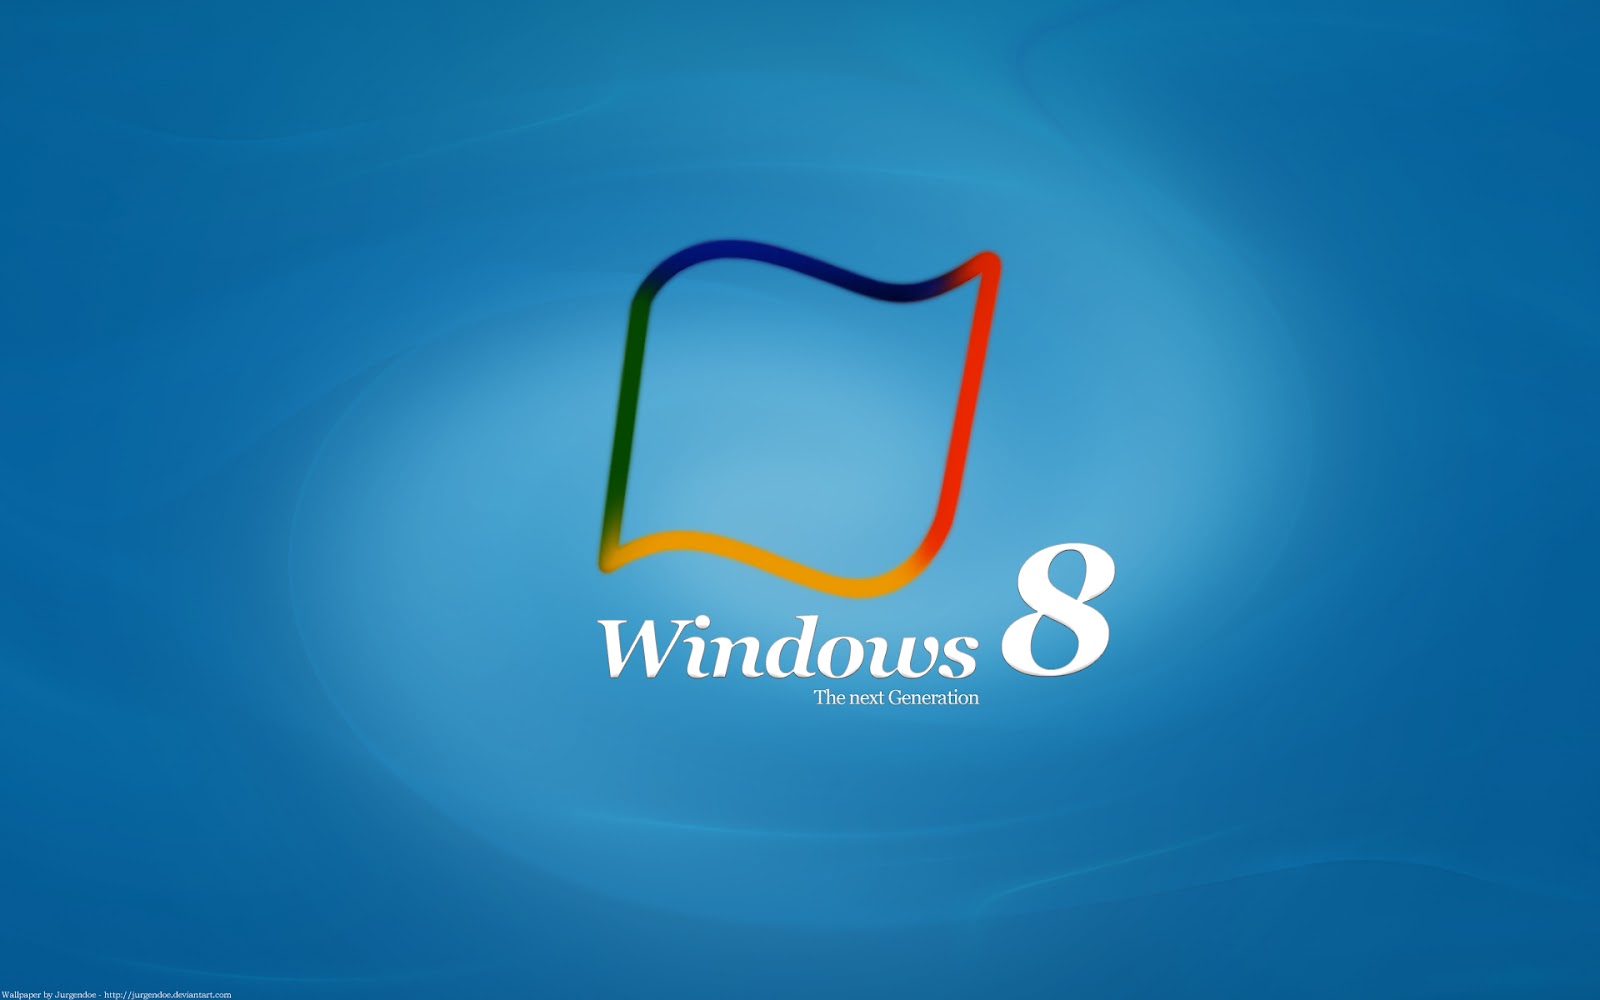  windows 8 wallpapers windows 8 official wallpapers windows 8